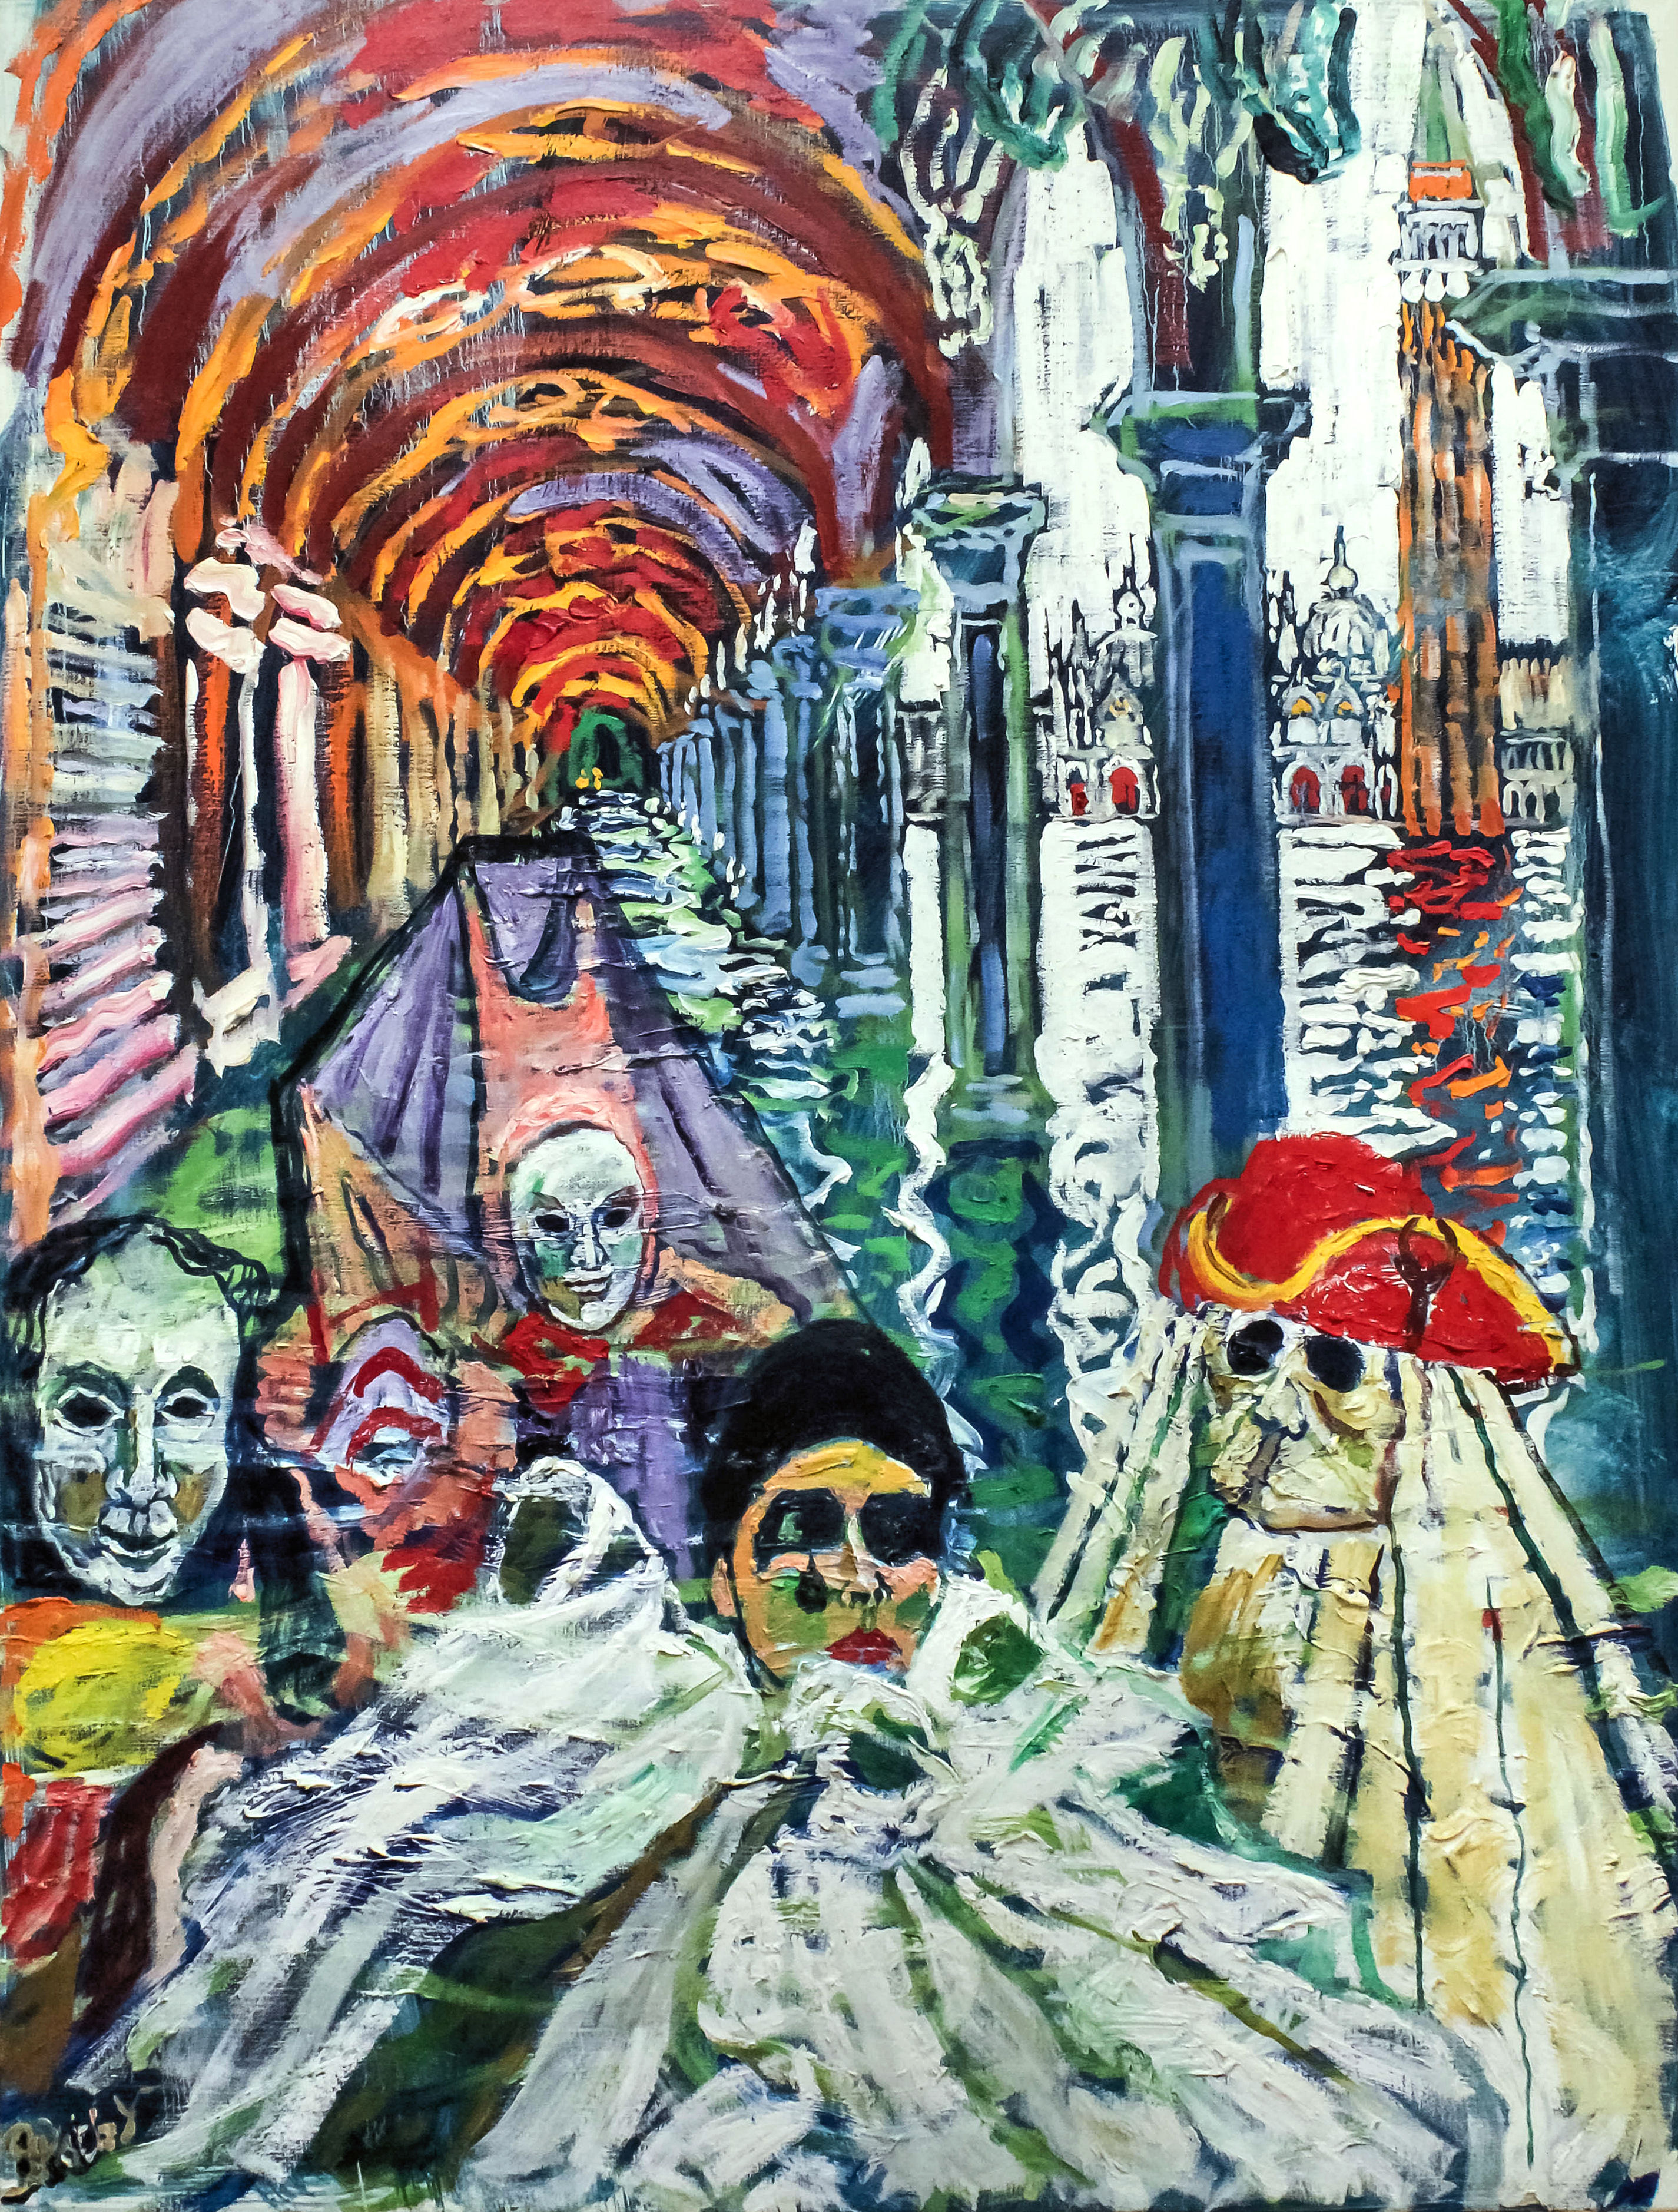 ARR John Bratby (1928-1992) - Oil painting - "Carnival Characters in Flooded St. Mark's Square,